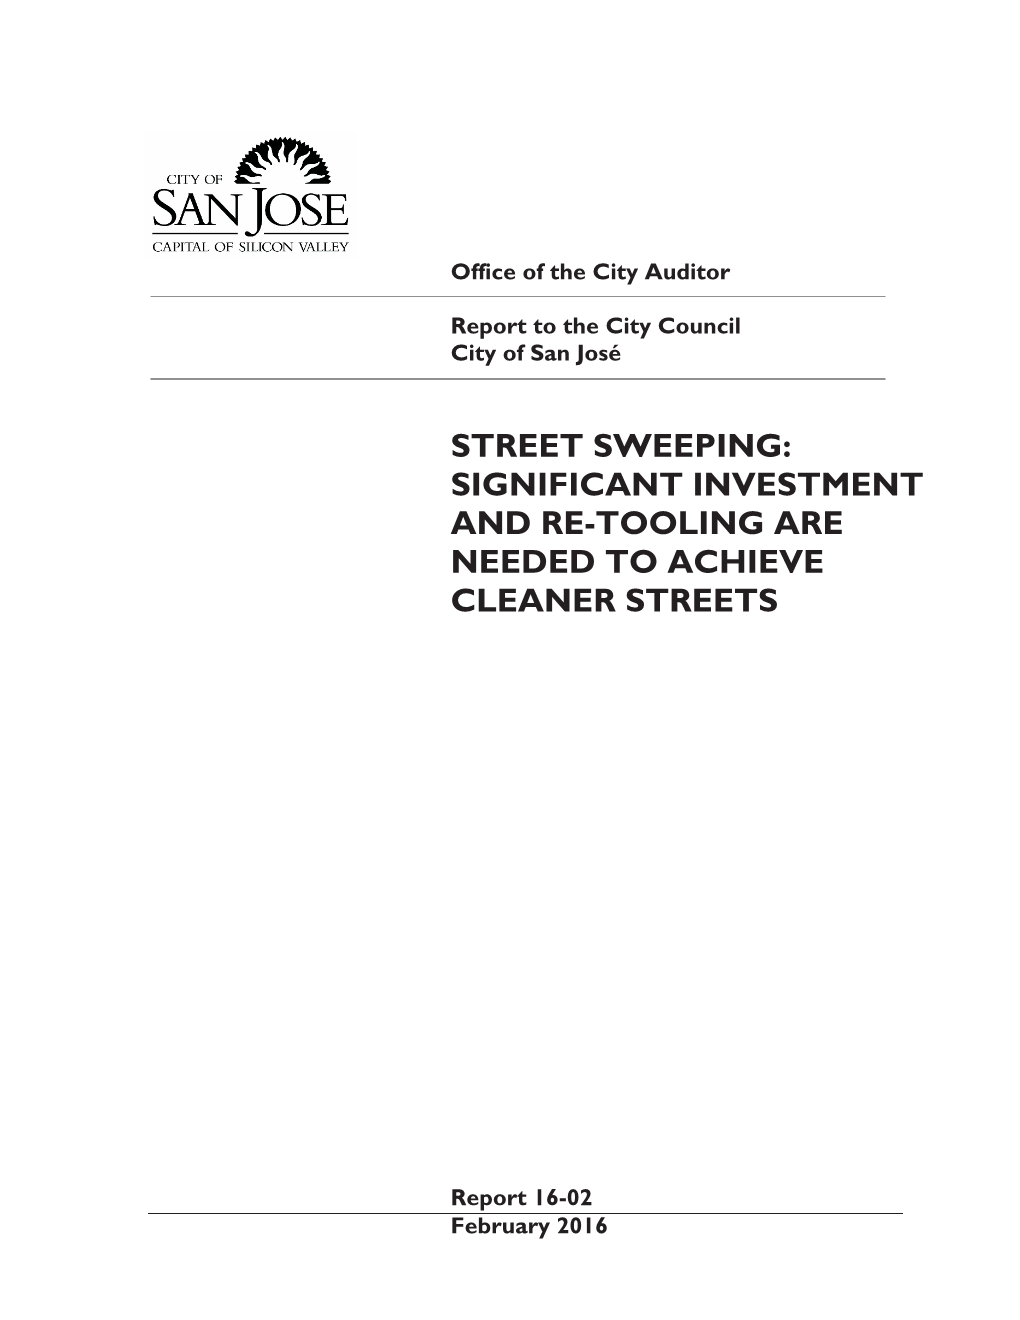 Street Sweeping: Significant Investment and Re-Tooling Are Needed to Achieve Cleaner Streets